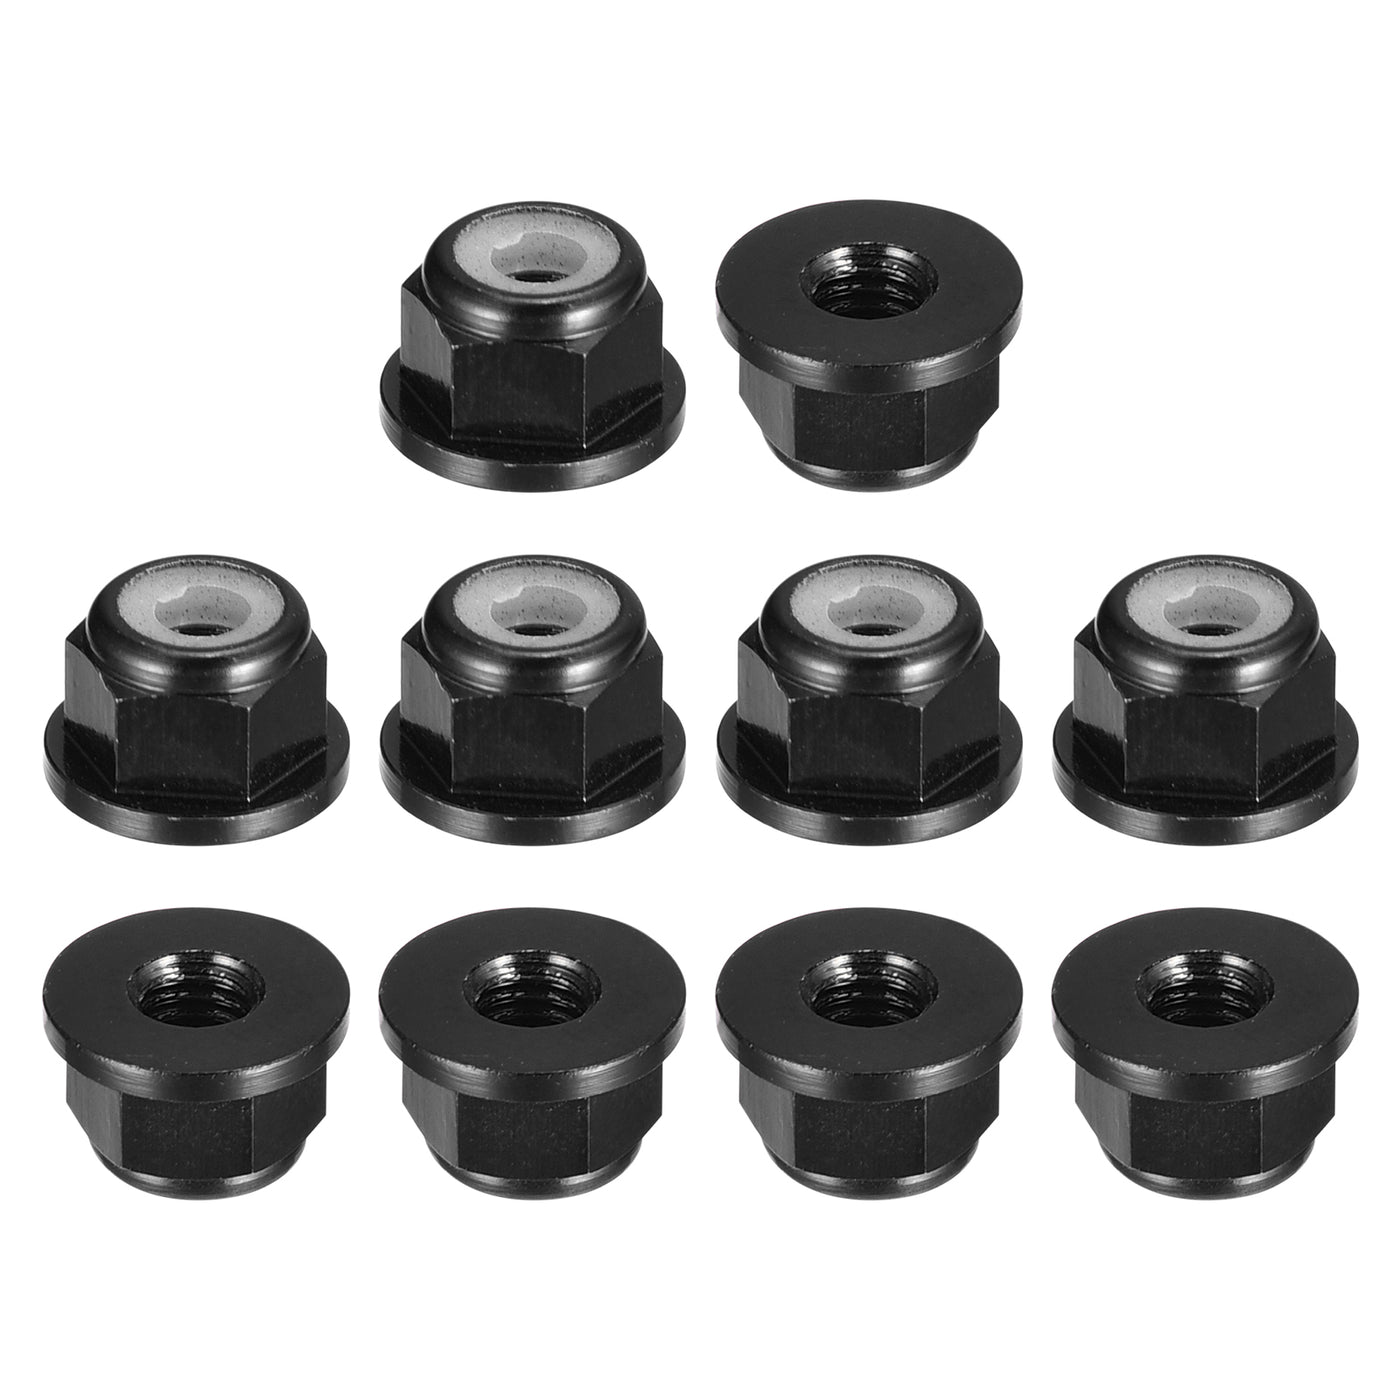 uxcell Uxcell Nylon Insert Hex Lock Nuts, 10pcs - M2 x 0.4mm Aluminum Alloy Self-Locking Nut, Anodizing Flange Lock Nut for Fasteners (Black)